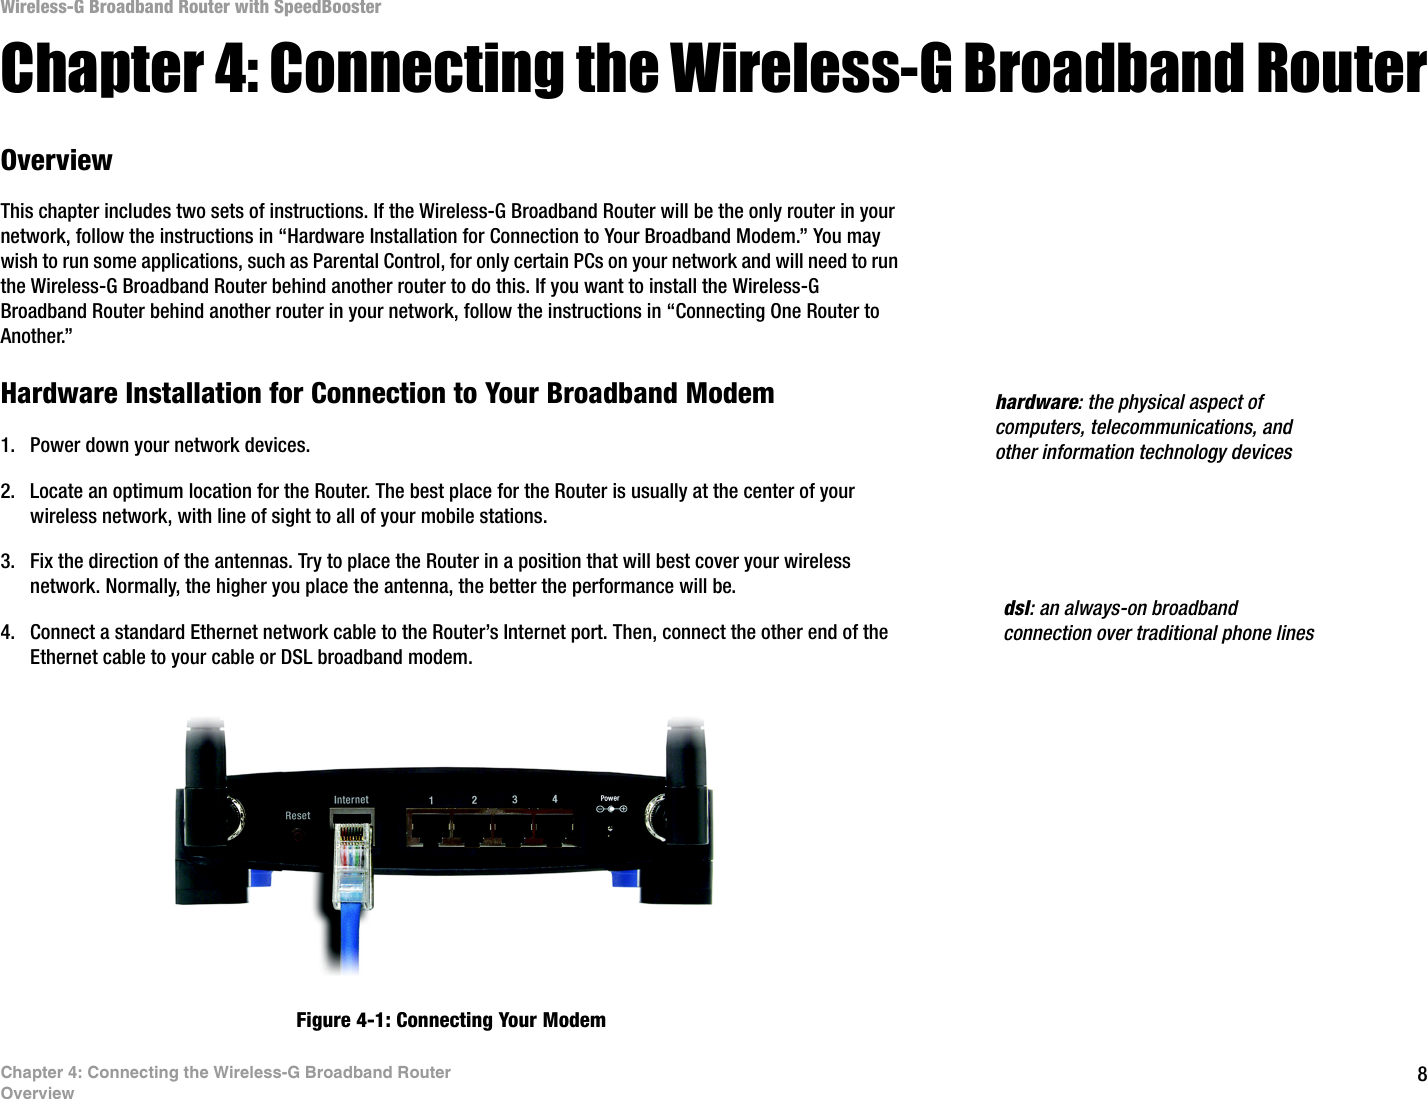 8Chapter 4: Connecting the Wireless-G Broadband RouterOverviewWireless-G Broadband Router with SpeedBoosterChapter 4: Connecting the Wireless-G Broadband RouterOverviewThis chapter includes two sets of instructions. If the Wireless-G Broadband Router will be the only router in your network, follow the instructions in “Hardware Installation for Connection to Your Broadband Modem.” You may wish to run some applications, such as Parental Control, for only certain PCs on your network and will need to run the Wireless-G Broadband Router behind another router to do this. If you want to install the Wireless-G Broadband Router behind another router in your network, follow the instructions in “Connecting One Router to Another.”Hardware Installation for Connection to Your Broadband Modem1. Power down your network devices.2. Locate an optimum location for the Router. The best place for the Router is usually at the center of your wireless network, with line of sight to all of your mobile stations.3. Fix the direction of the antennas. Try to place the Router in a position that will best cover your wireless network. Normally, the higher you place the antenna, the better the performance will be.4. Connect a standard Ethernet network cable to the Router’s Internet port. Then, connect the other end of the Ethernet cable to your cable or DSL broadband modem.Figure 4-1: Connecting Your Modemdsl: an always-on broadband connection over traditional phone lineshardware: the physical aspect of computers, telecommunications, and other information technology devices